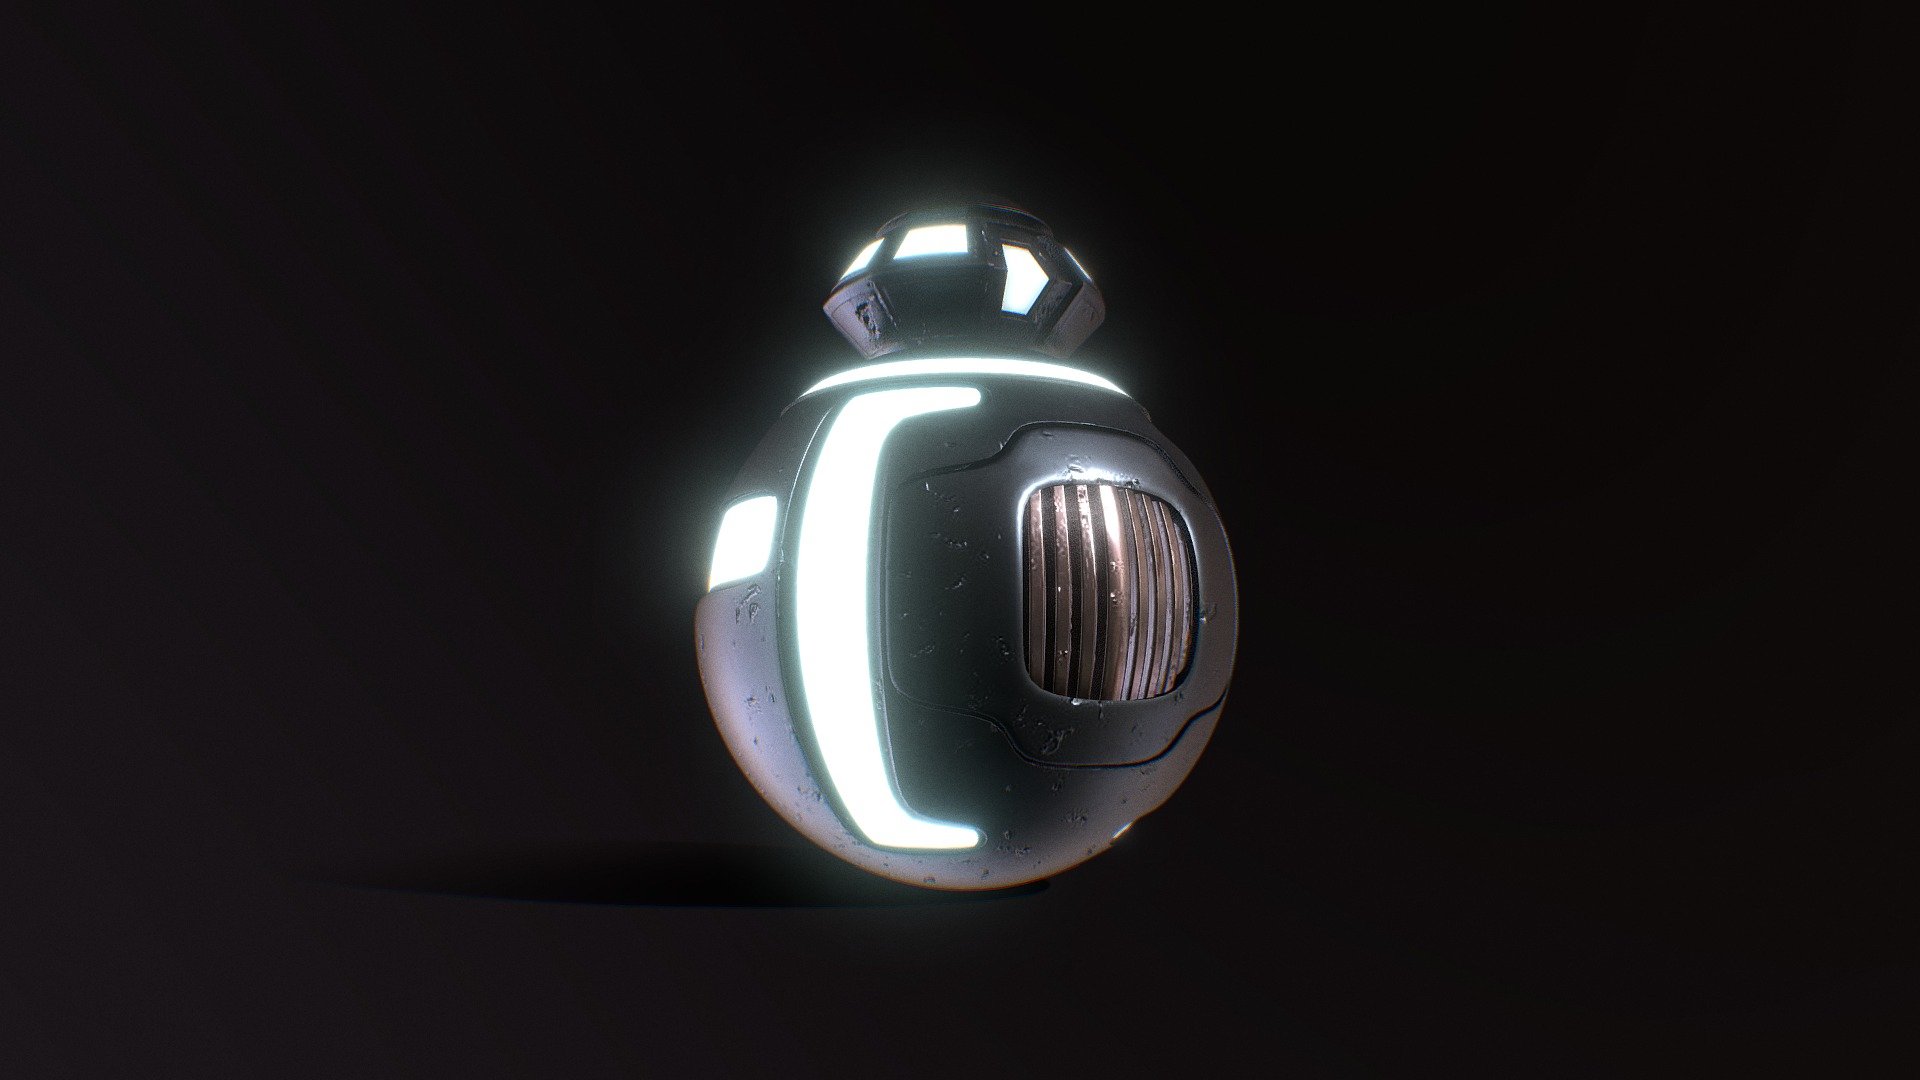 Star Wars inspired Droid